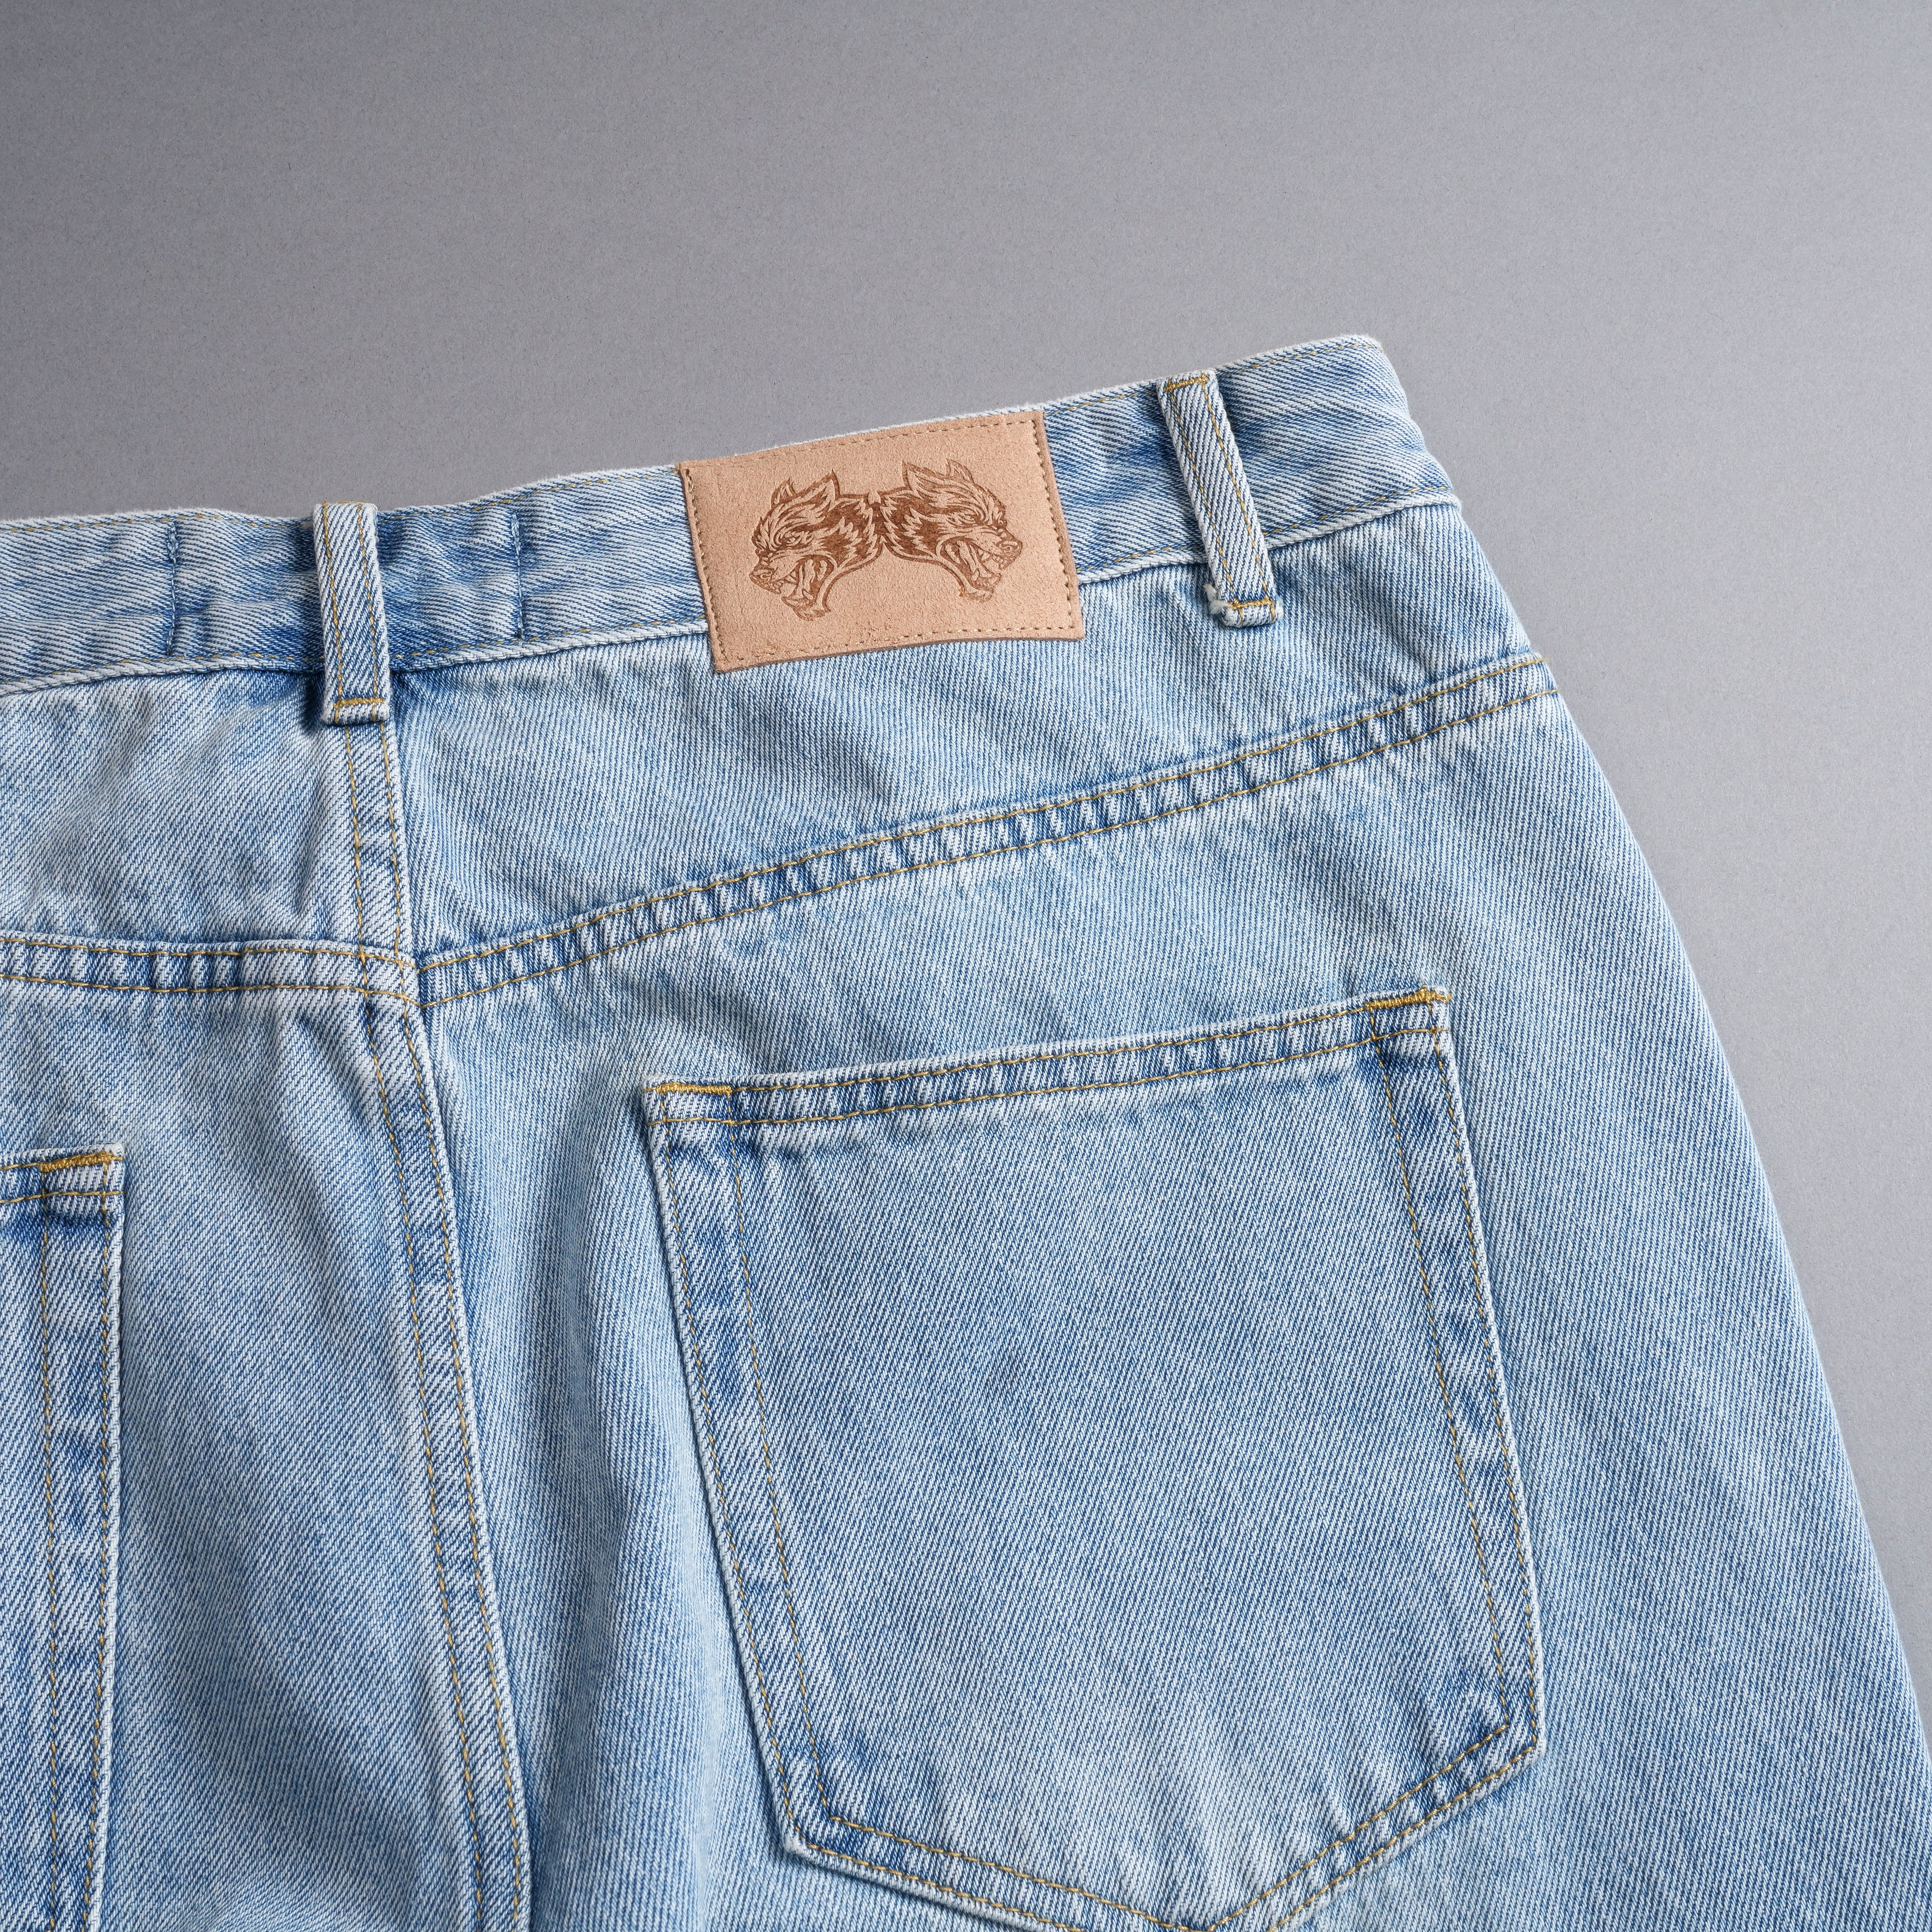 Tall Can Campbell Denim Jeans in Light Wash